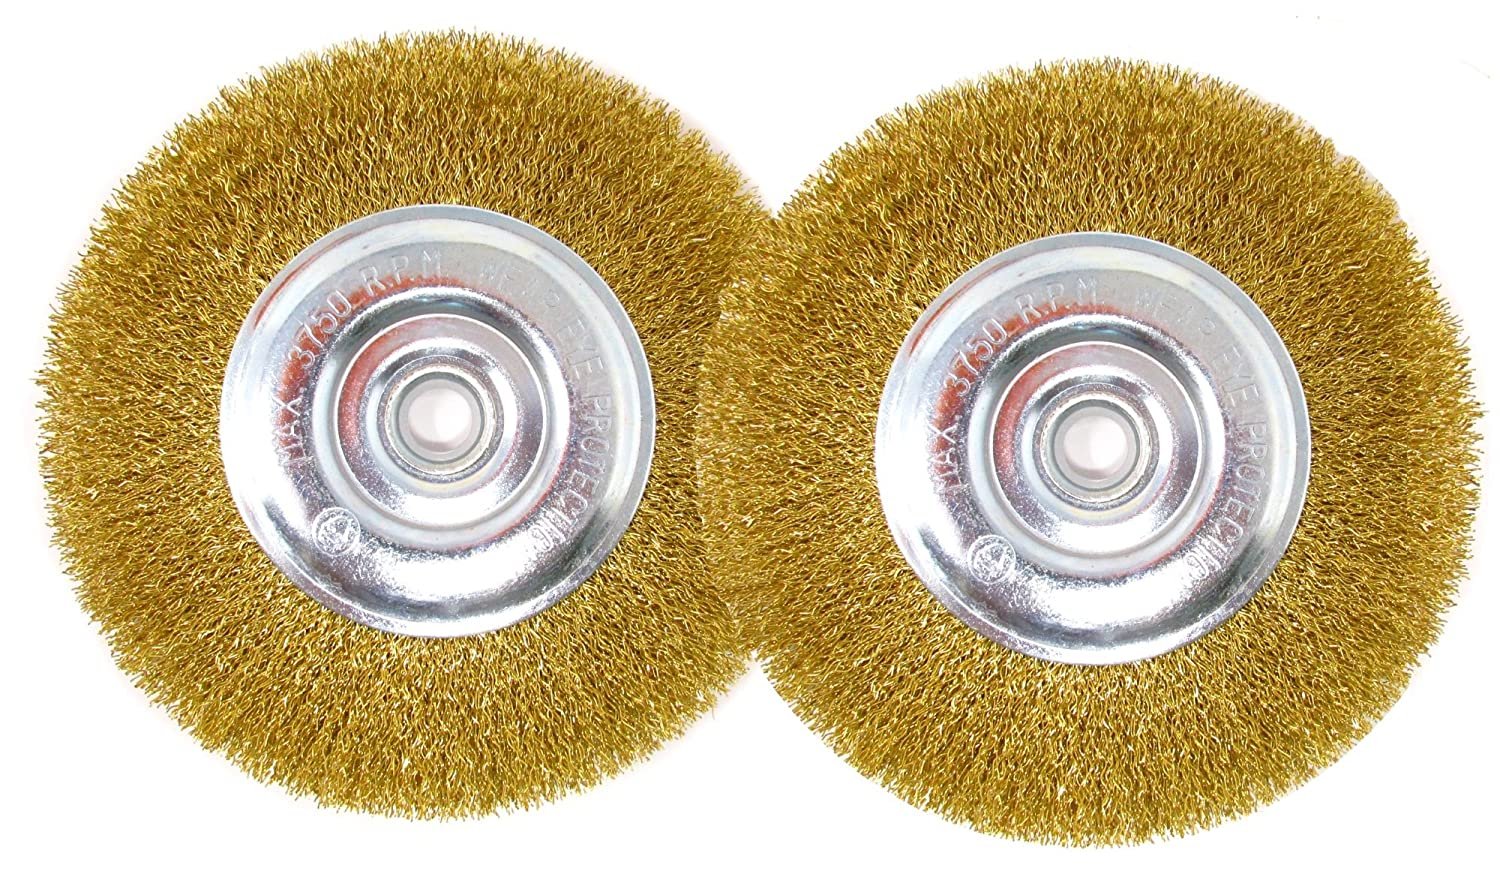 6-Inch Wire Wheel Brush Set for Bench Grinder, Brass Coated, Pack of 2 –  LINE10 Tools